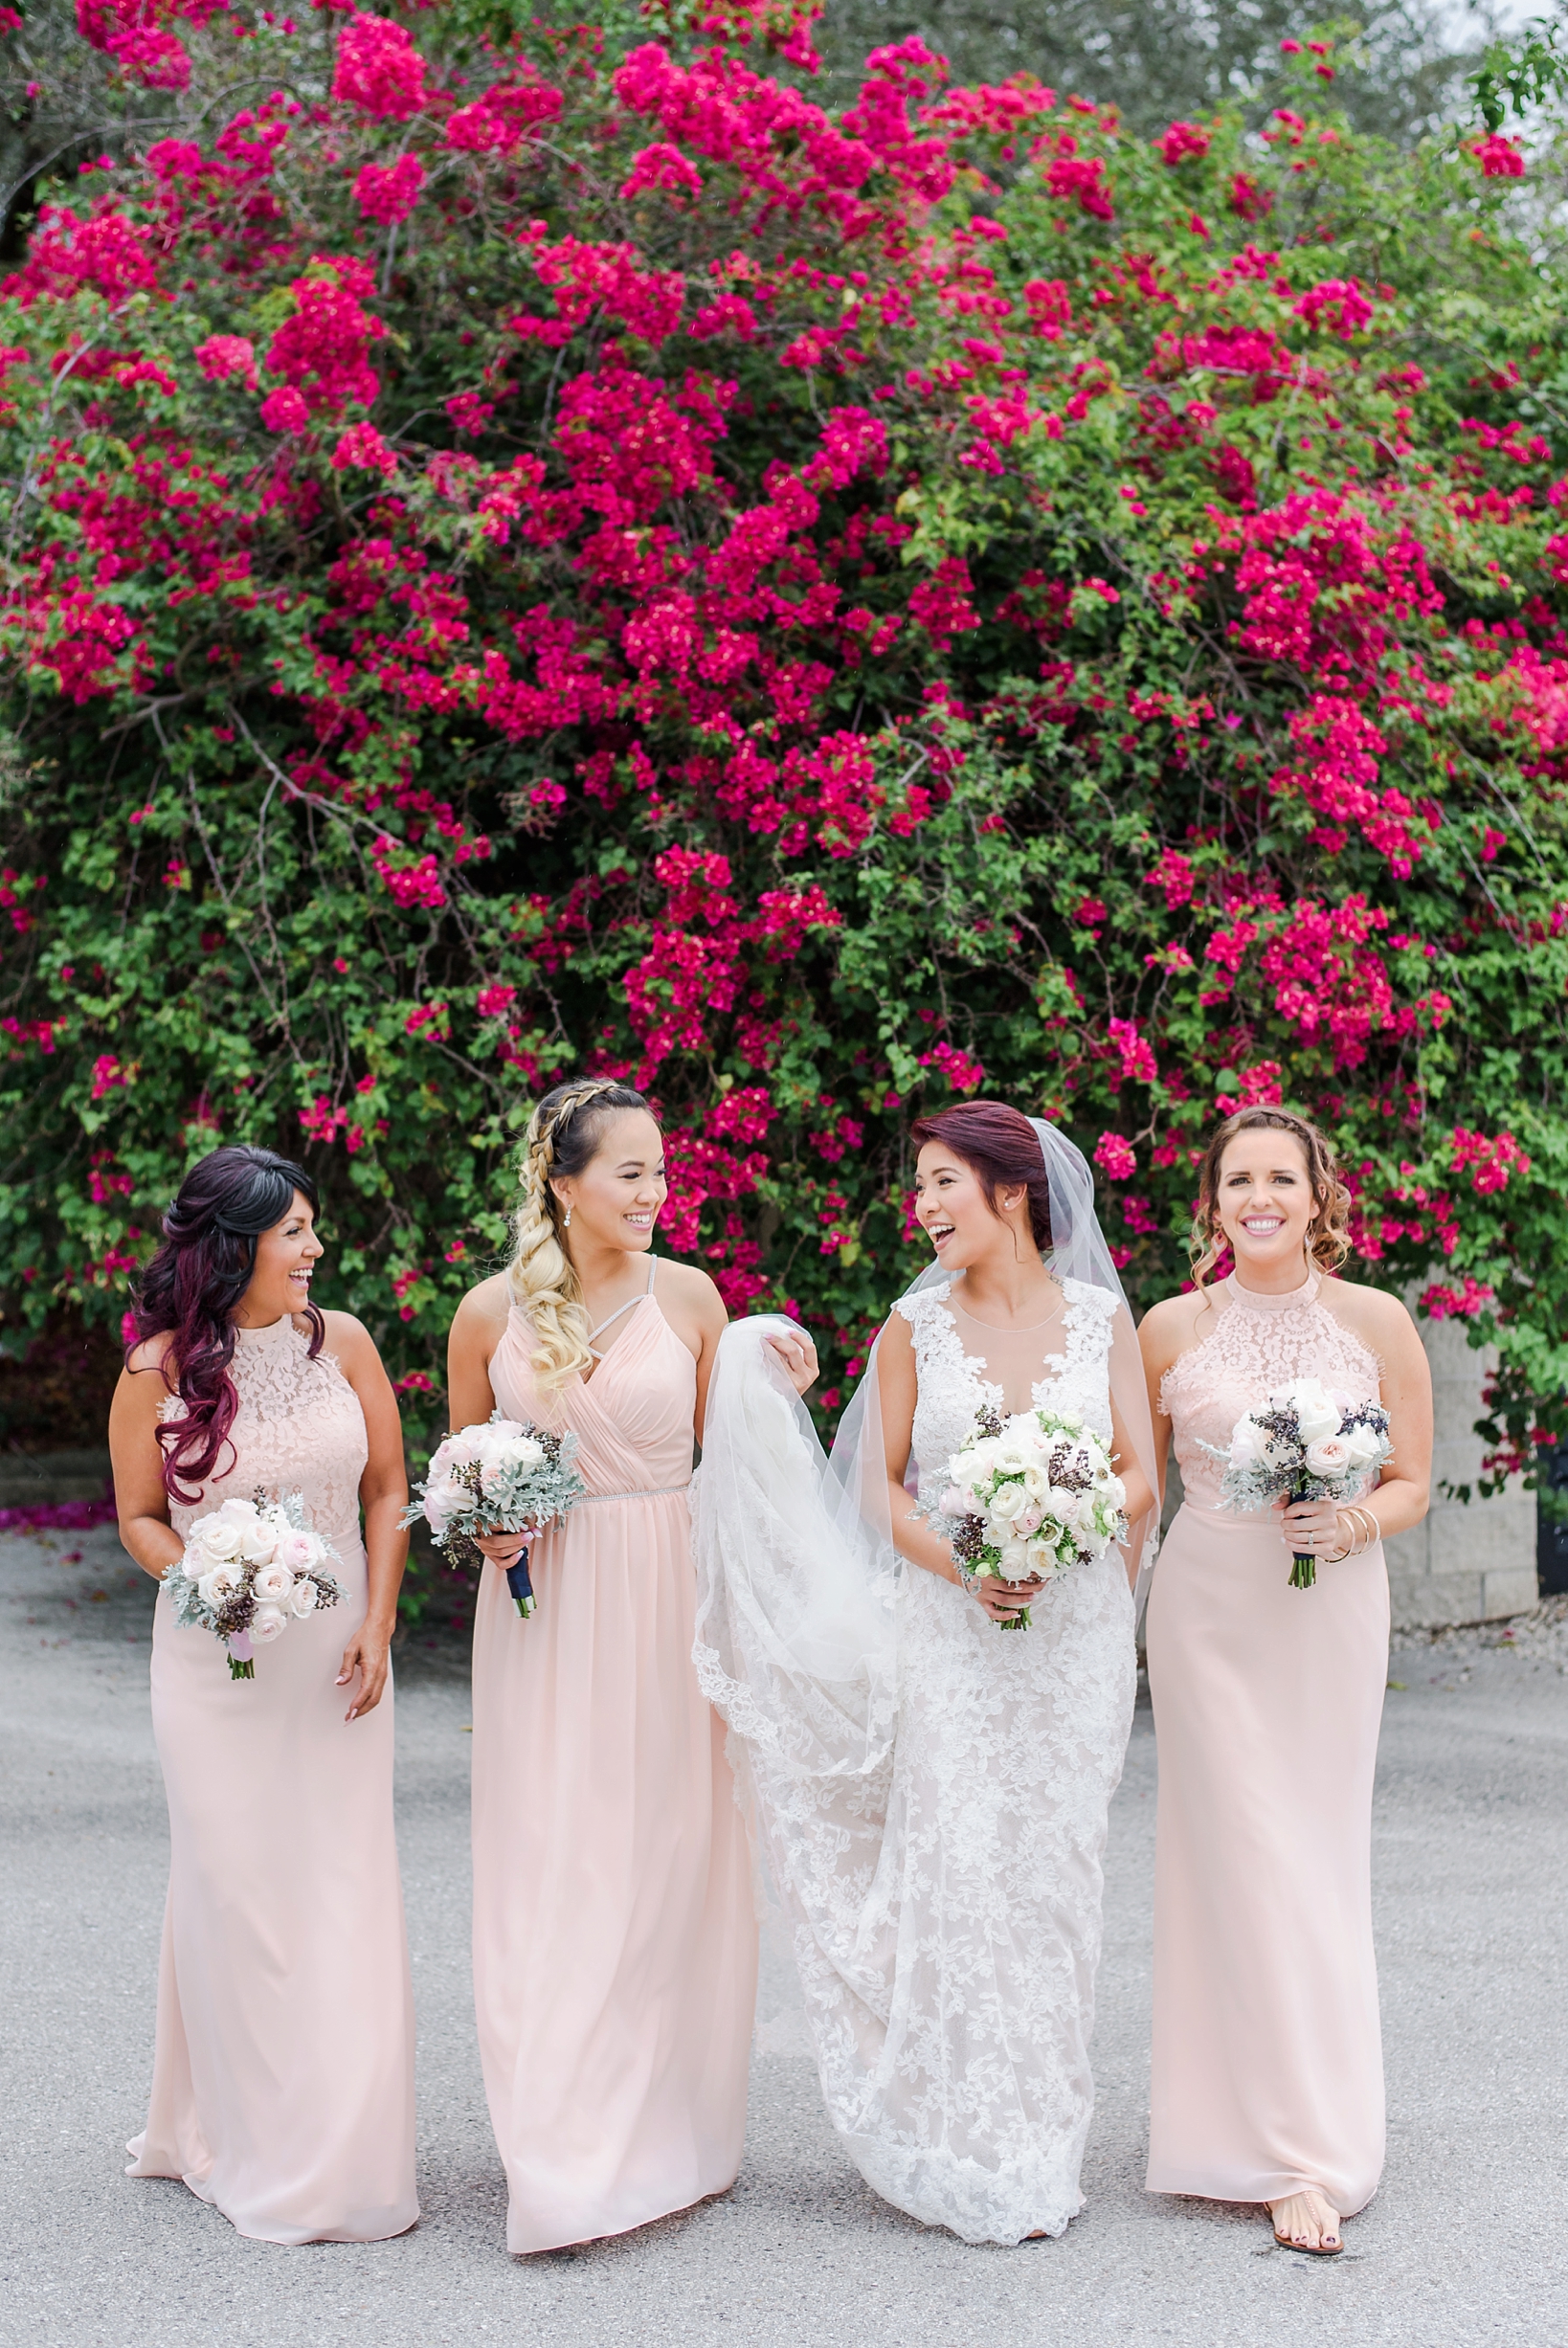 Bride and her bridesmaids by Sarah & Ben Photography